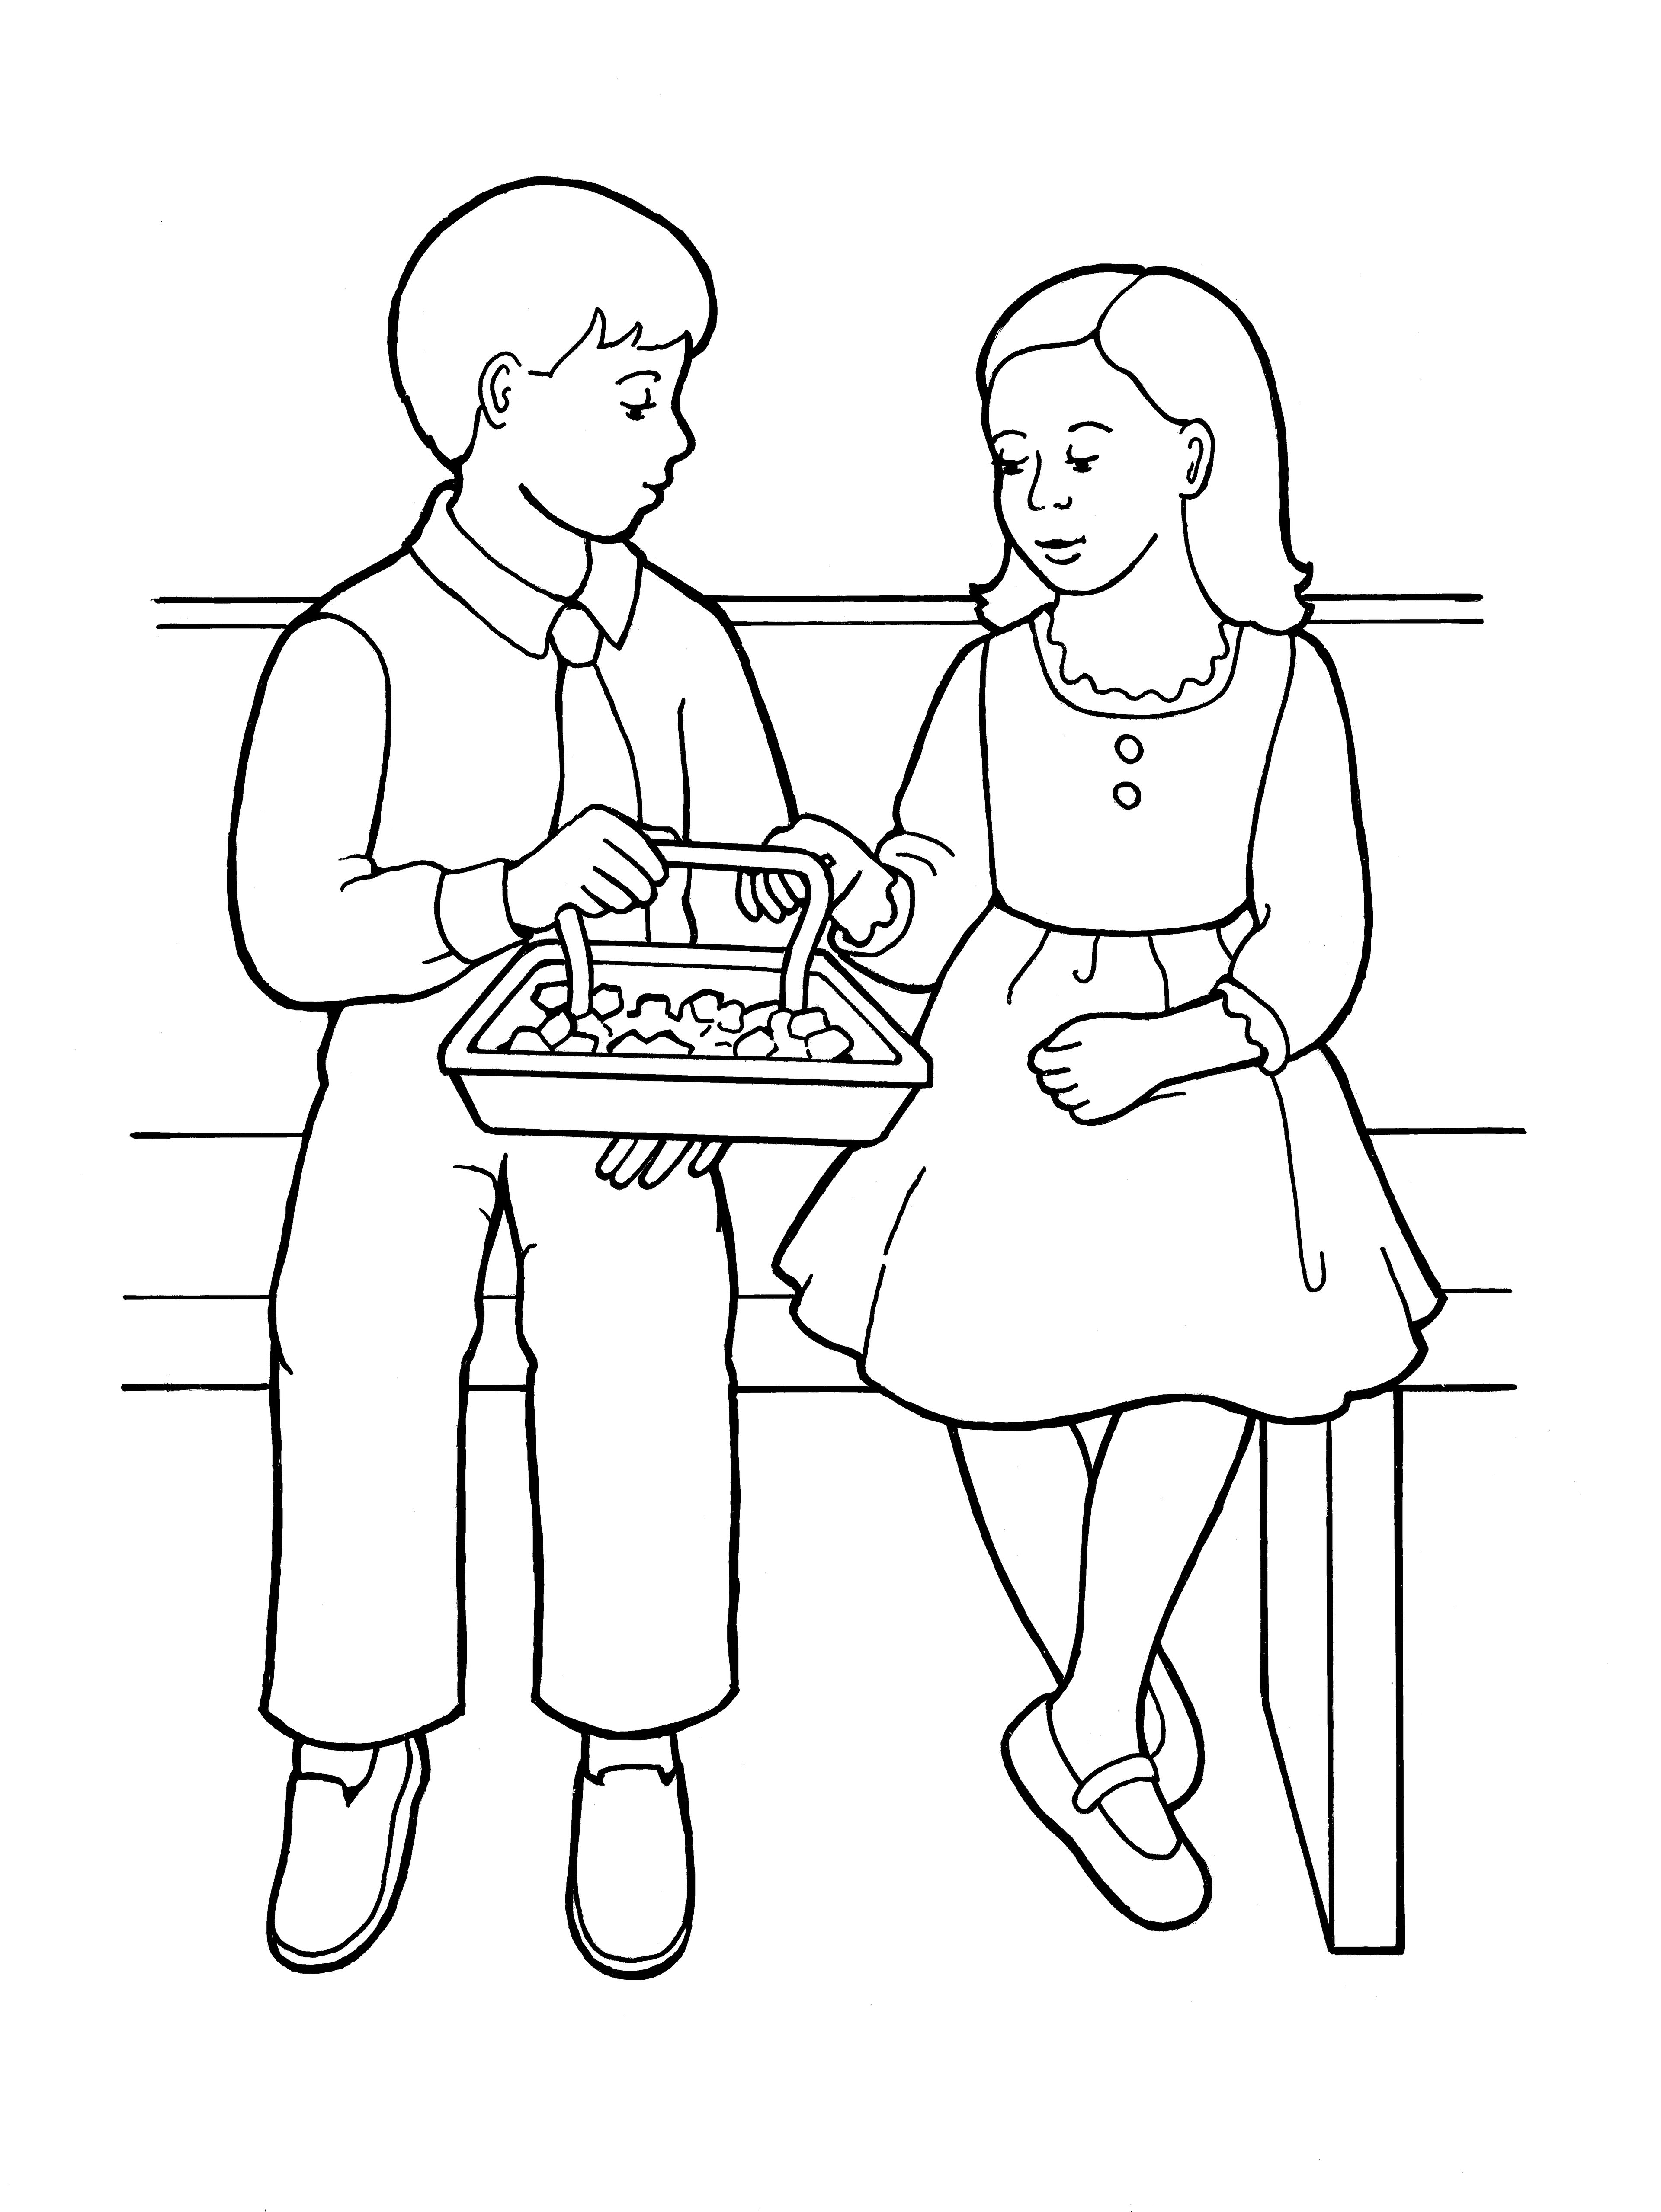 An illustration of a young girl and young boy partaking of the sacrament bread, from the nursery manual Behold Your Little Ones (2008), page 115.